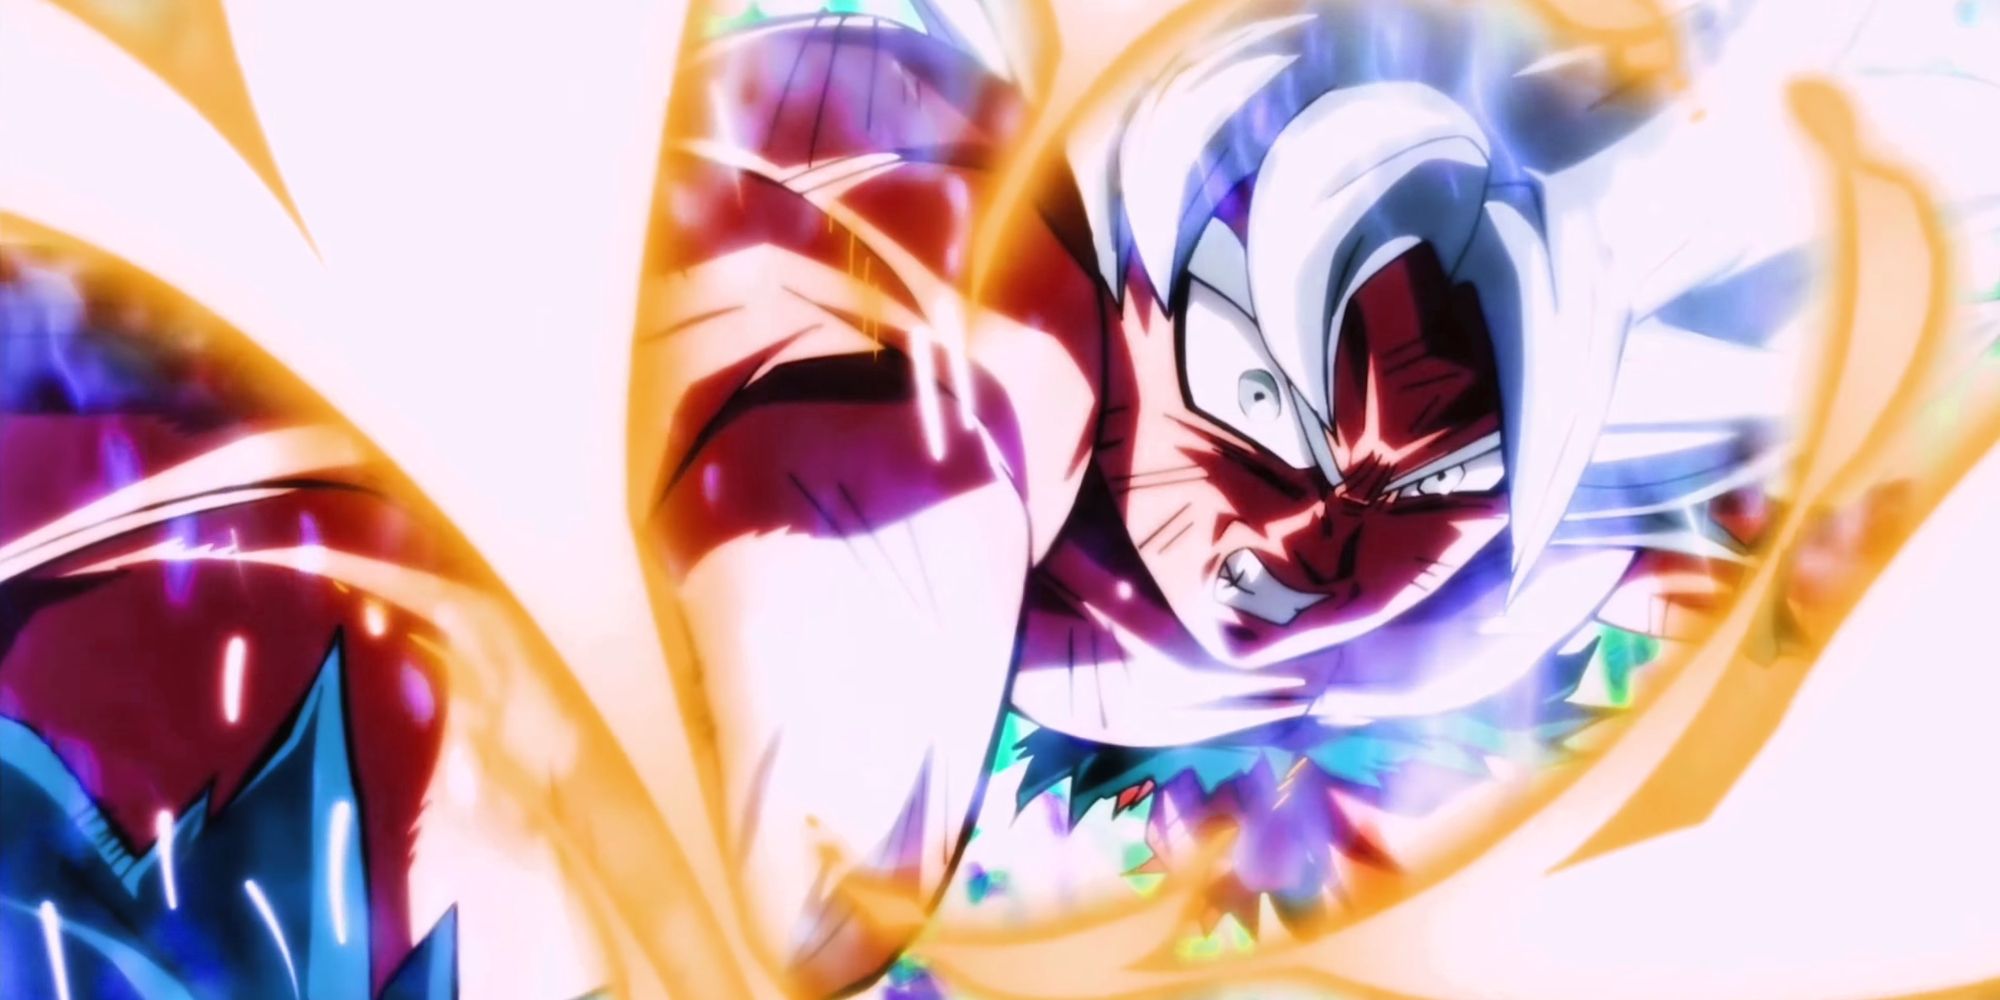 Image from Dragon Ball Super anime episode #130 shows a powered up Silver Haired Goku angerly punching with many types of aura's floating around him.